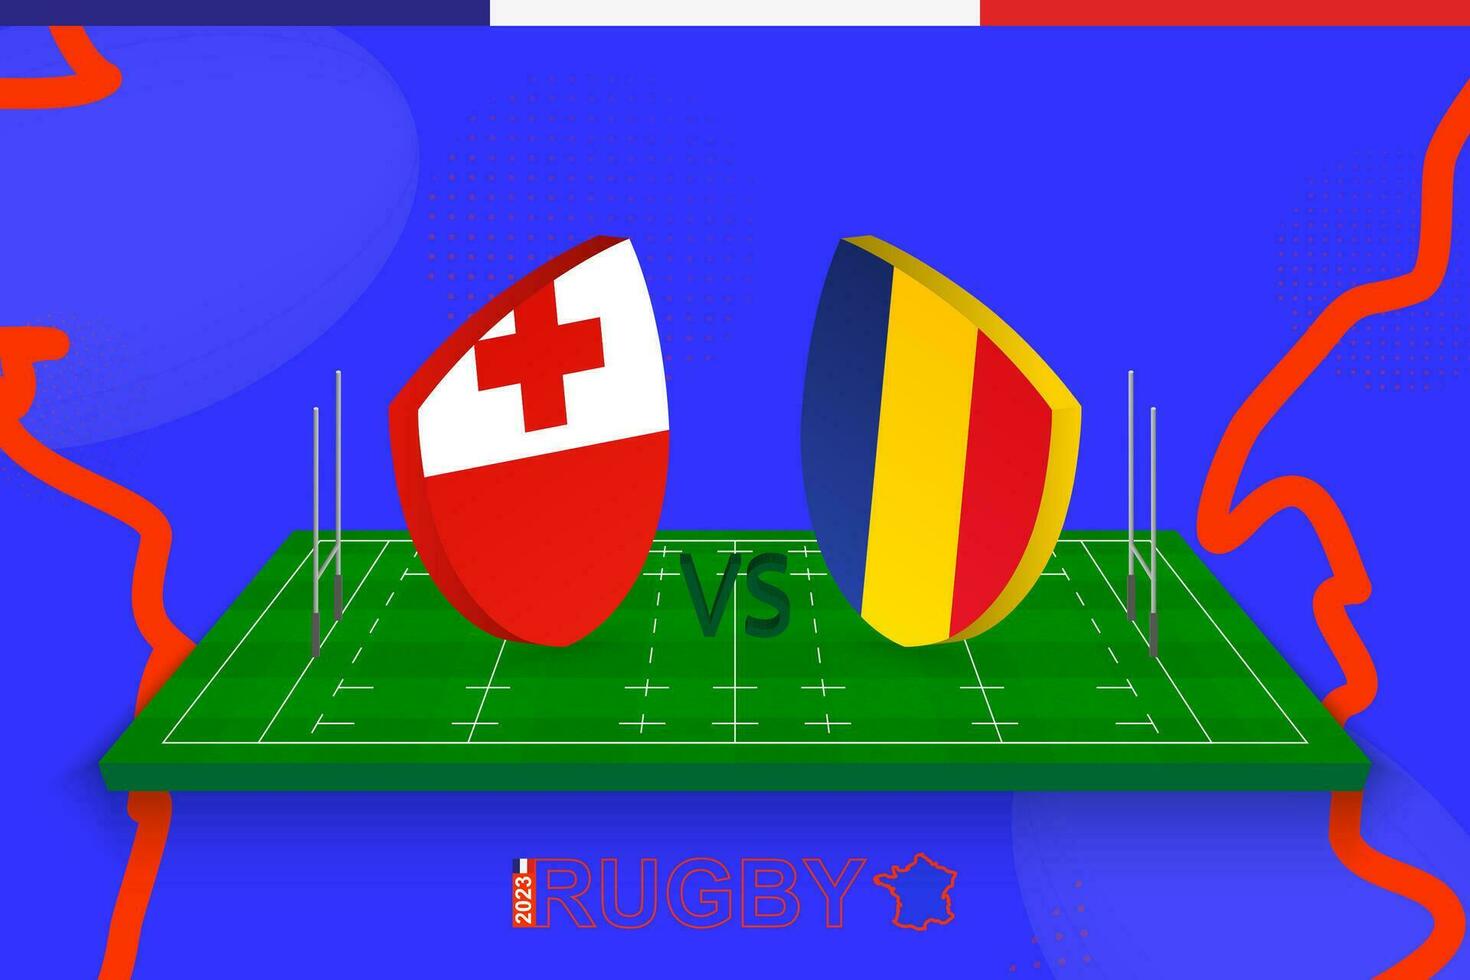 Rugby team Tonga vs Romania on rugby field. Rugby stadium on abstract background for international championship. vector